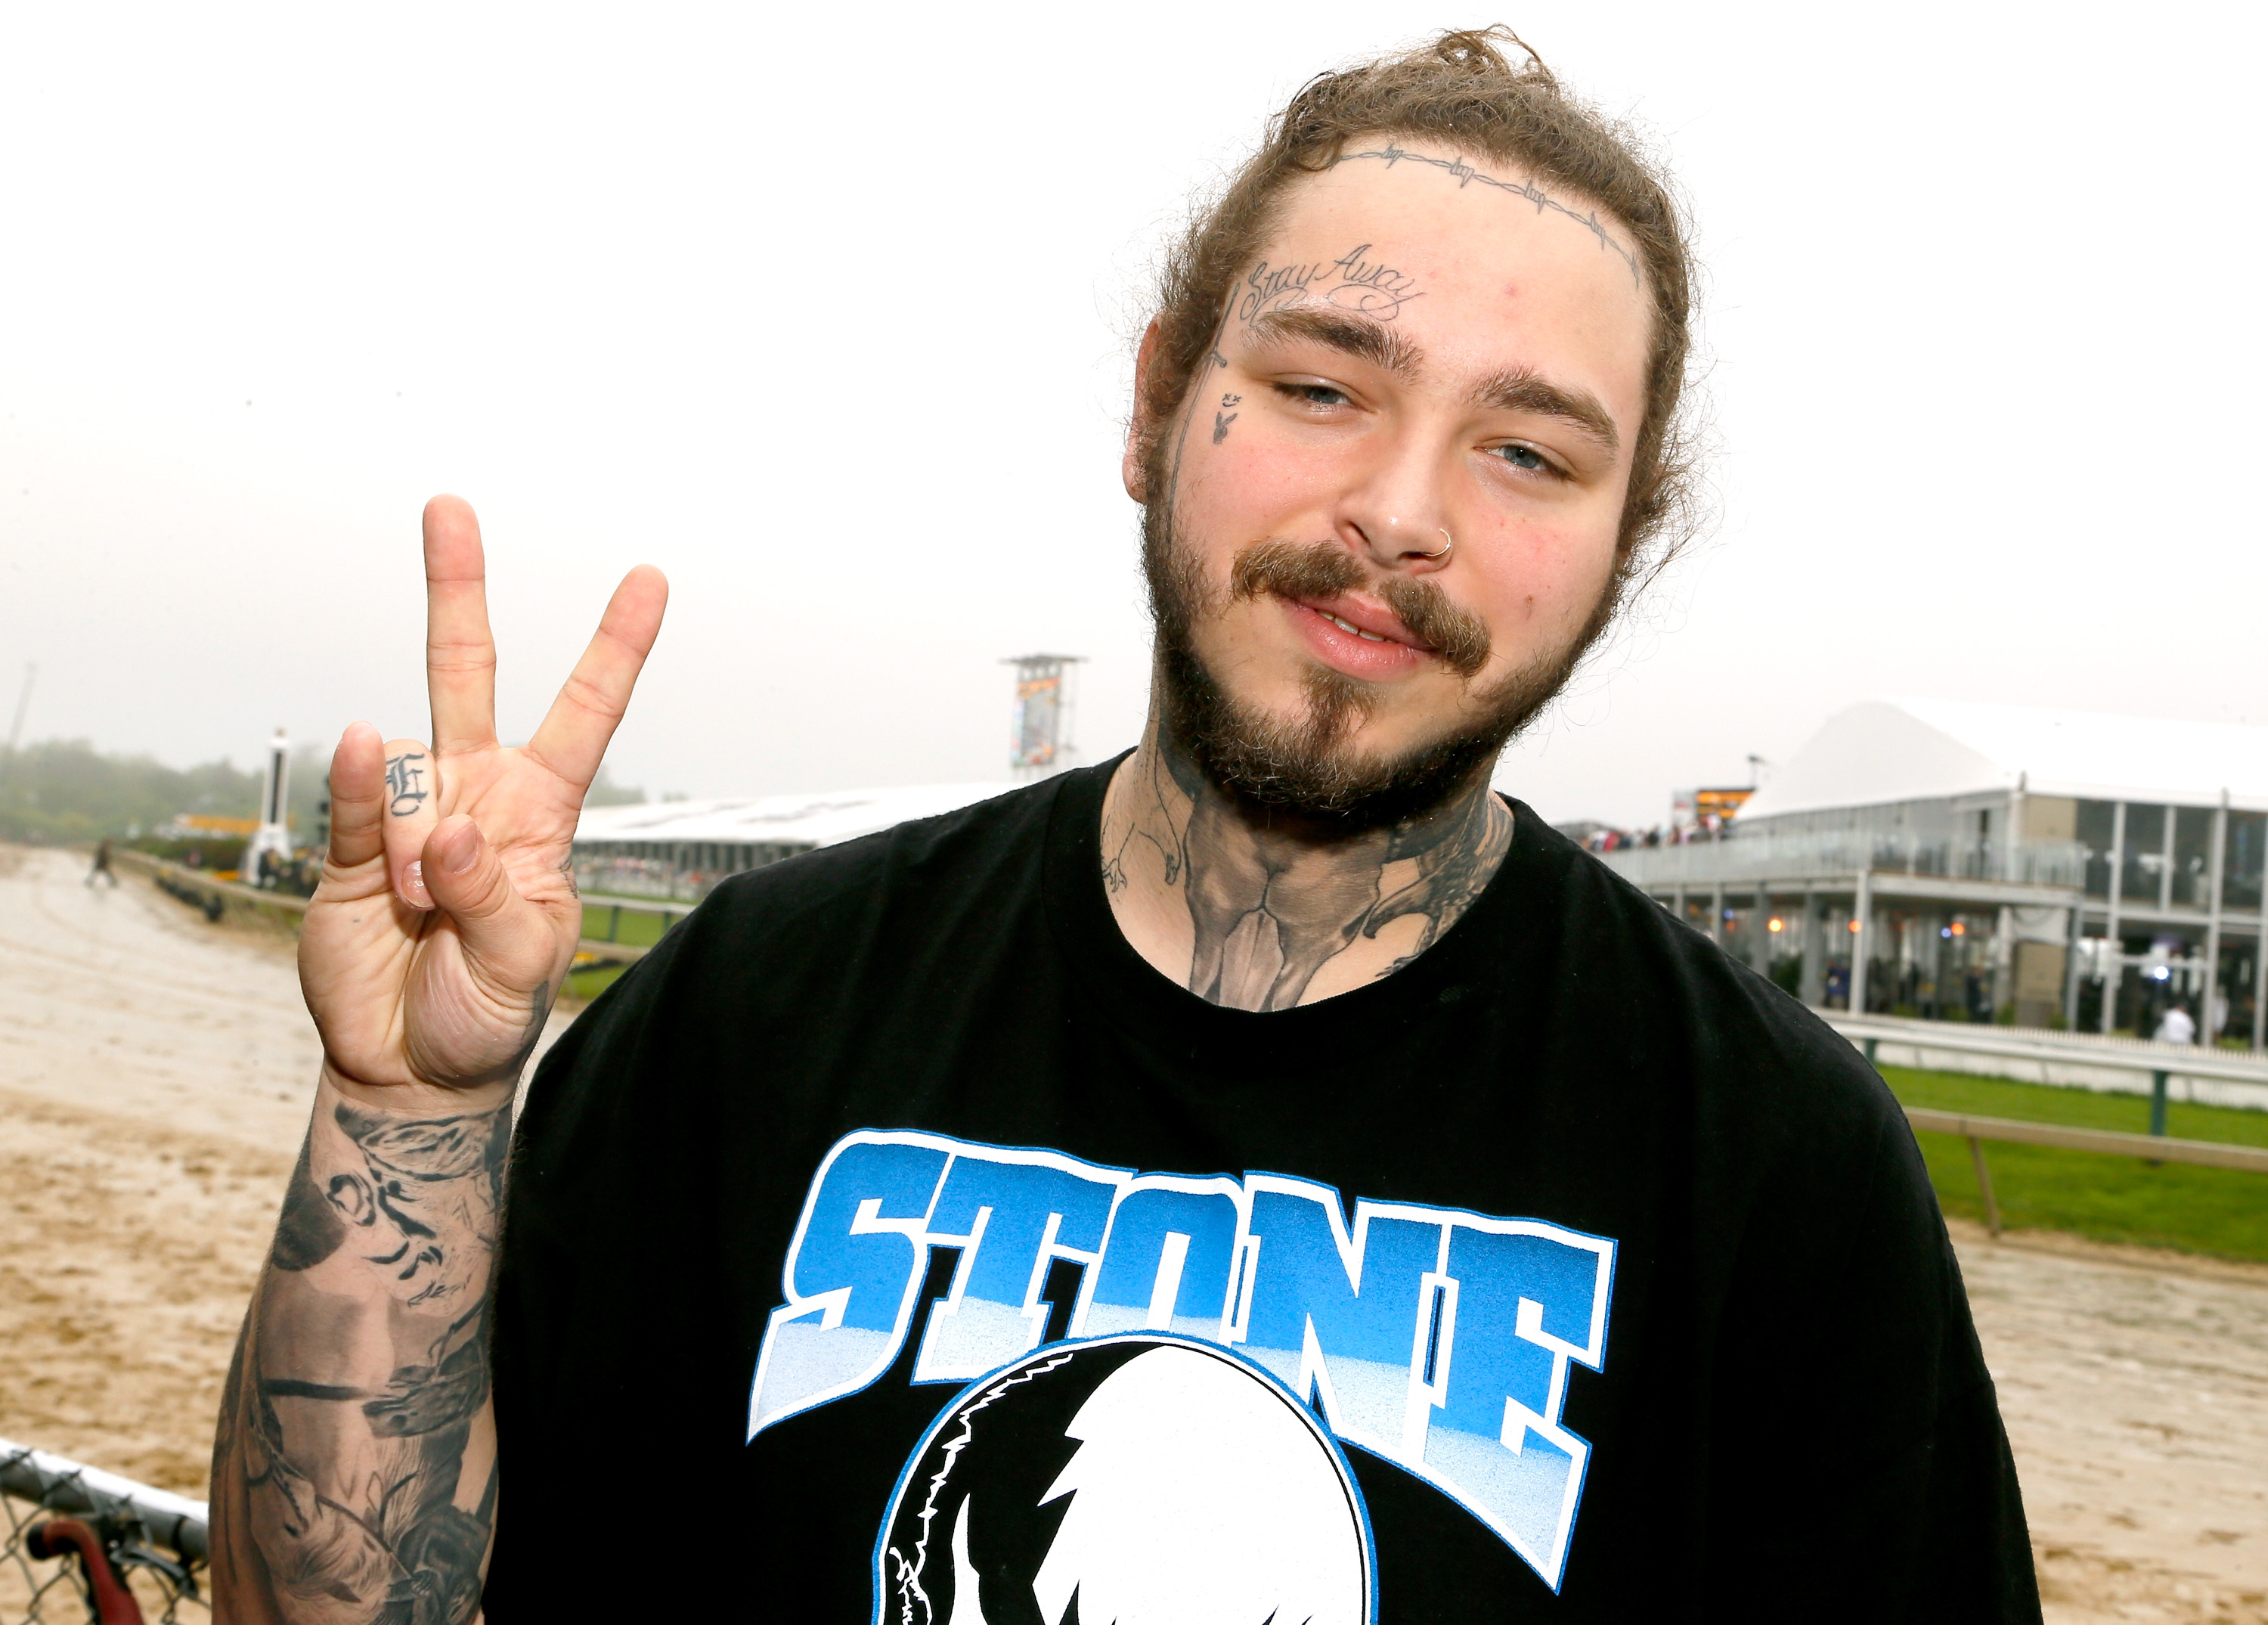 Post Malone Called A "B***h" During Meet & Greet "That's Rude"